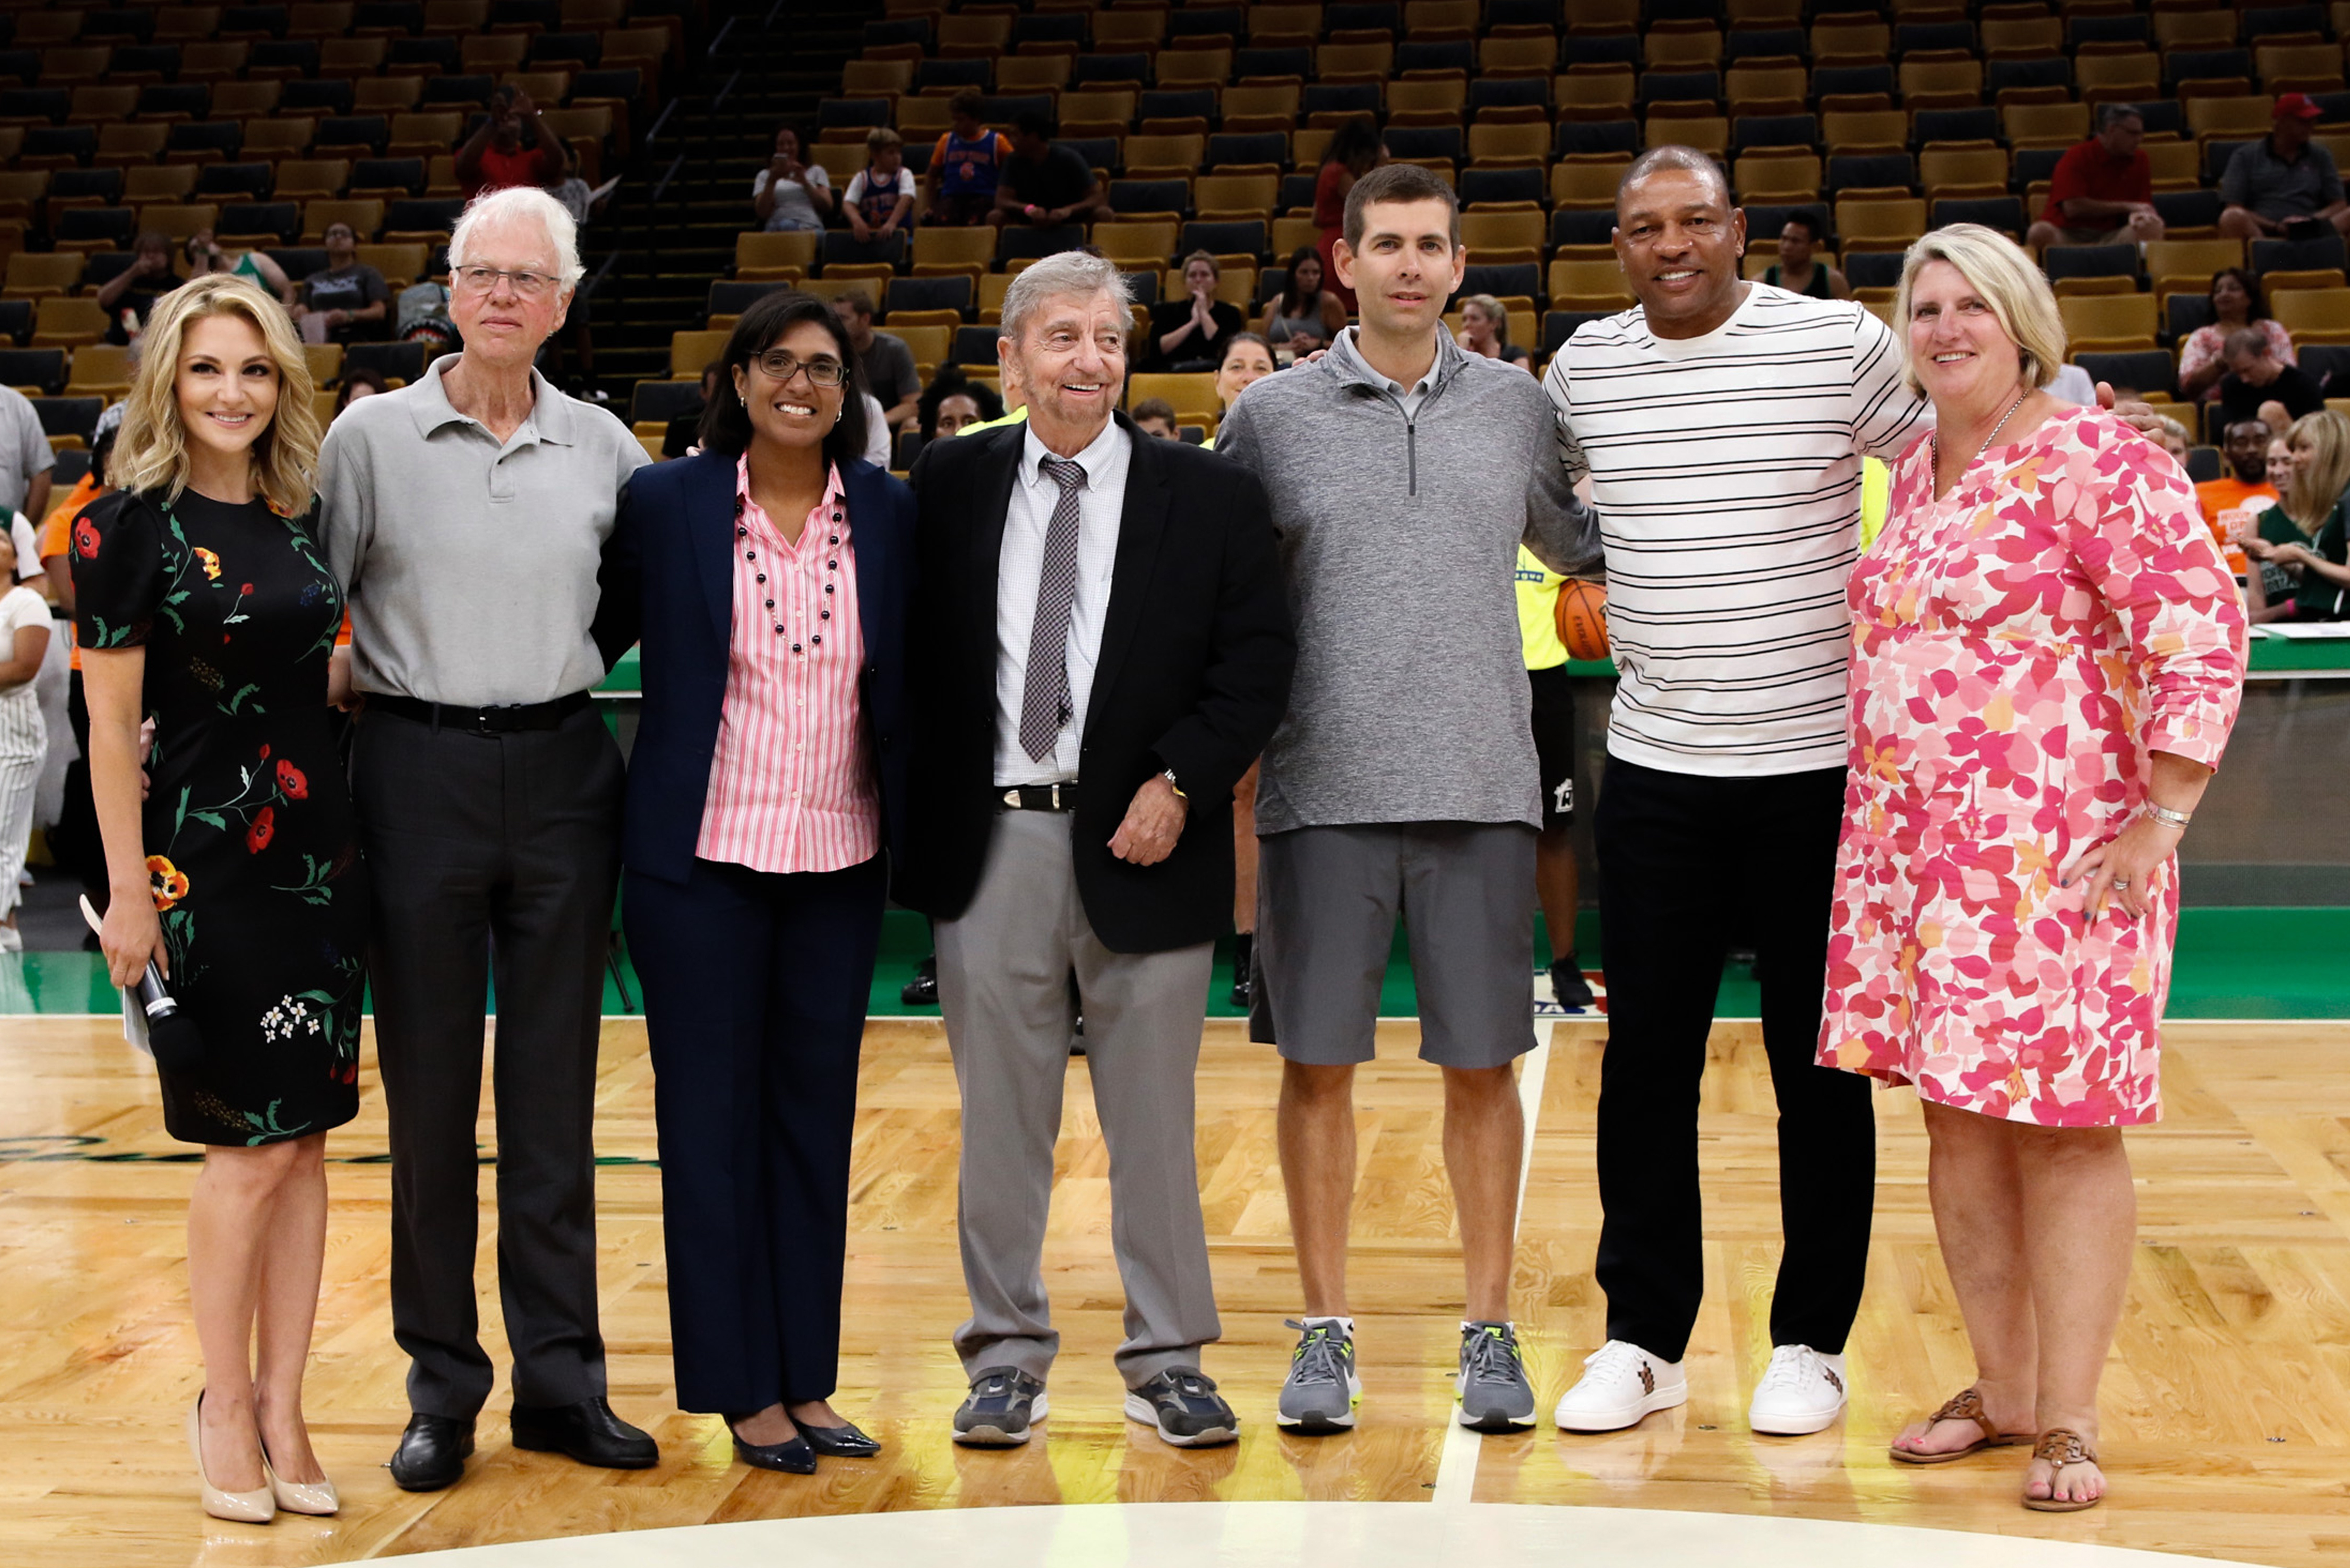 ABCD thanks the dedicated and talented team that once again brought HOOP DREAMS to TD Garden on September 4 when corporate teams battled it out on in a basketball tournament to support ABCD Youth Services. (l-r) Danielle Trotta, NBC Sports Boston; Bob Ryan, Sharon Scott-Chandler, John Drew, Brad Stevens, Doc Rivers and Amy Latimer.